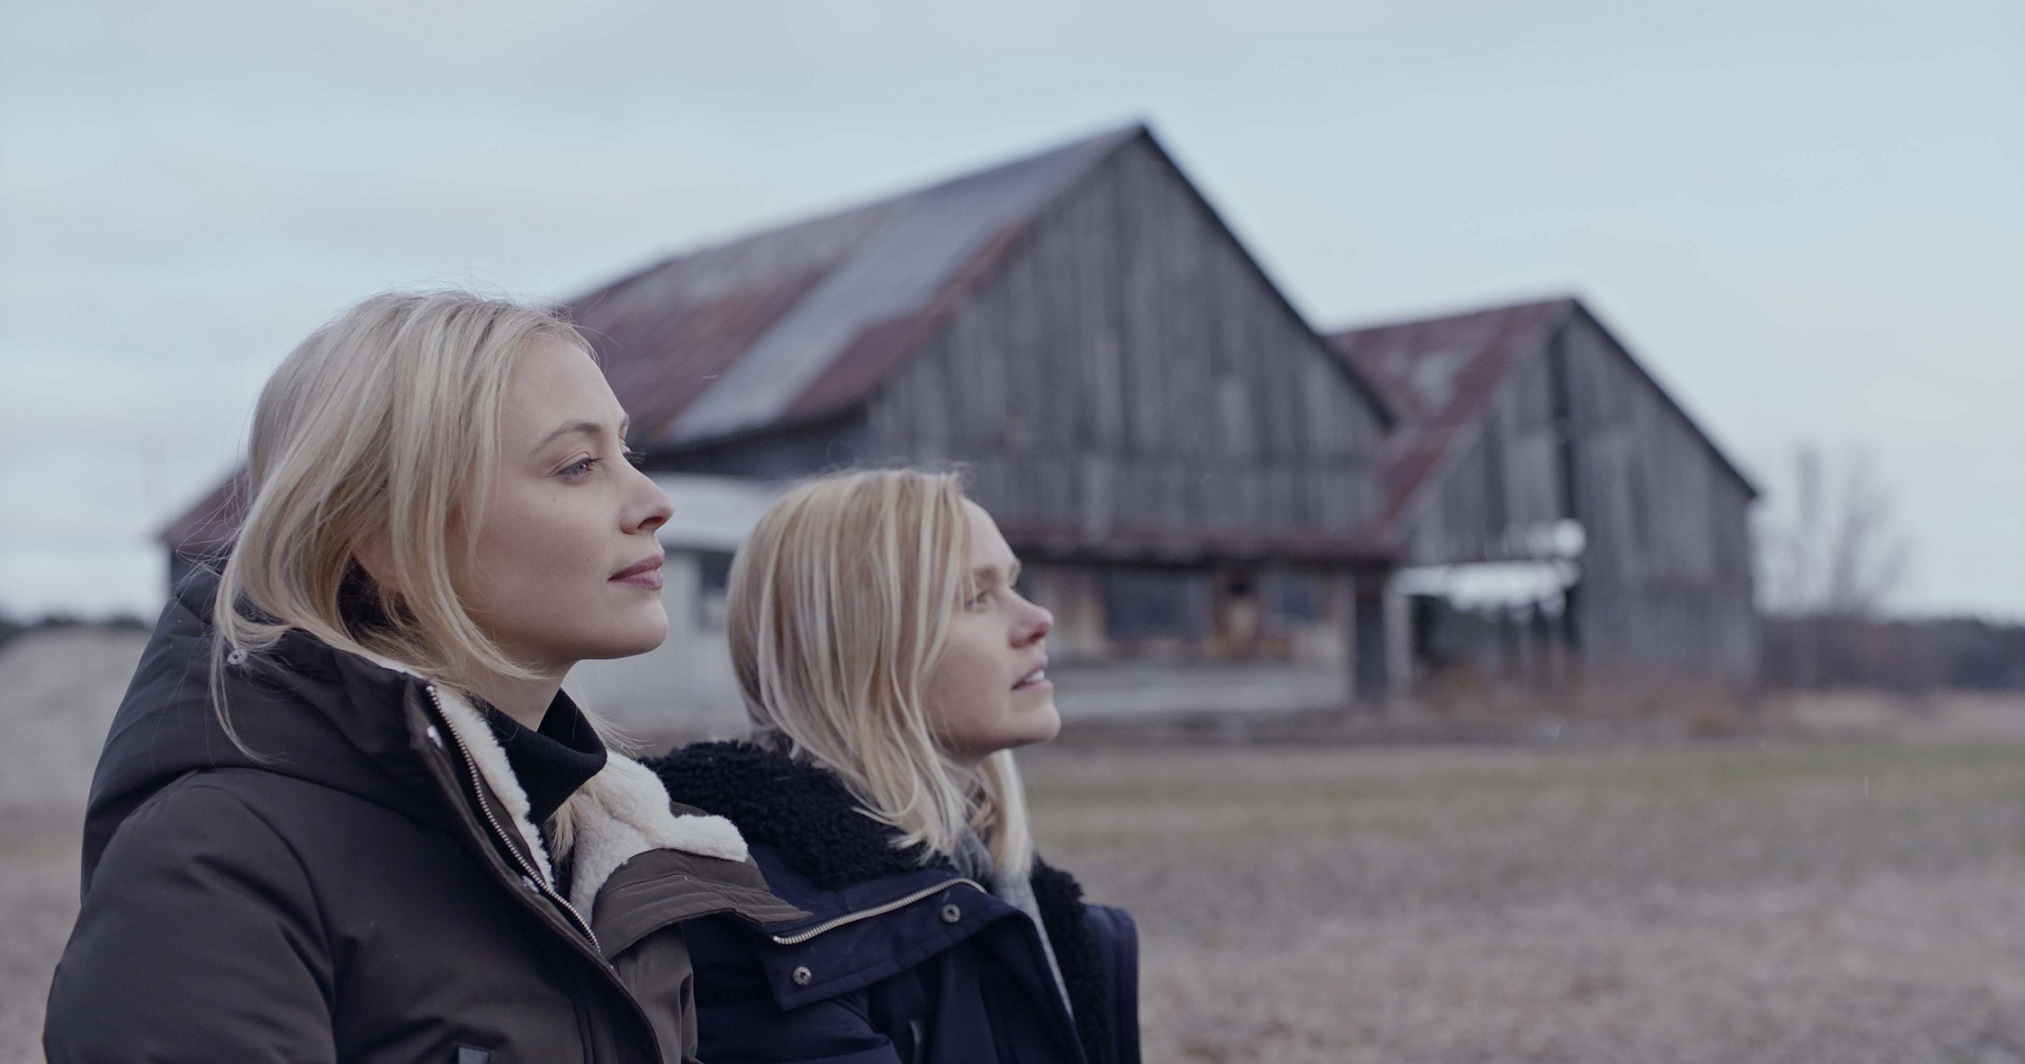 Trailer Watch: Alison Pill & Sarah Gadon Are Sisters Coping with Loss in “All My Puny Sorrows”